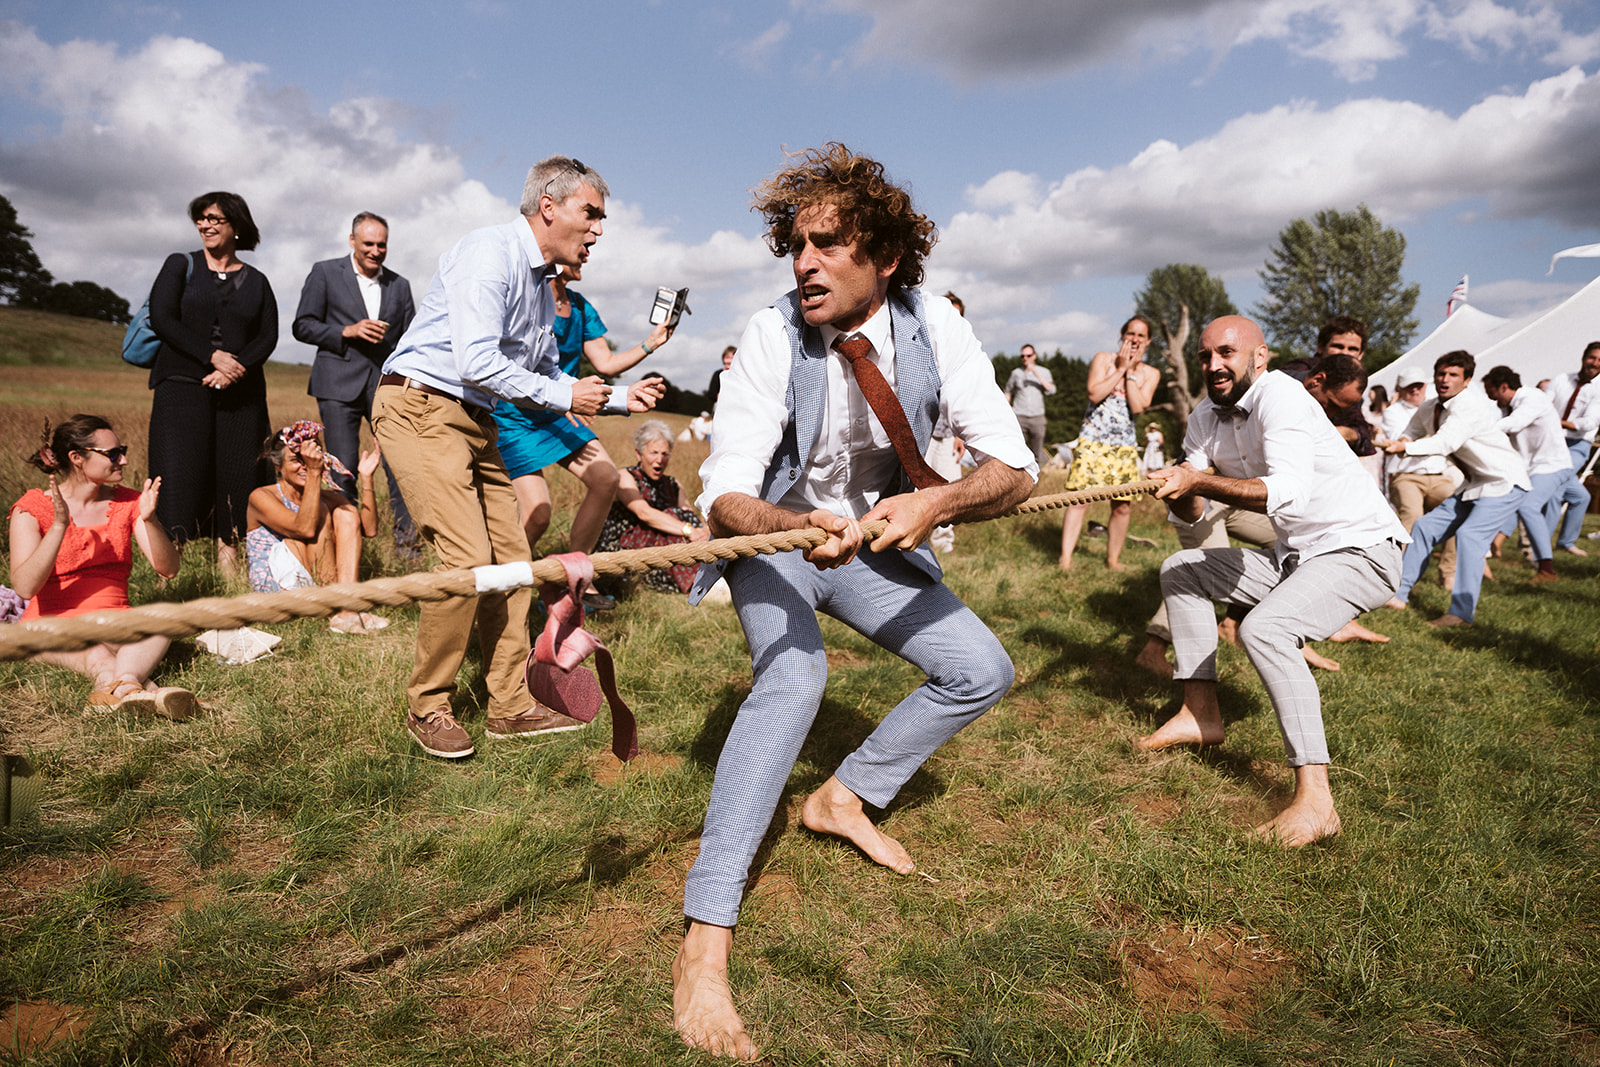 Groom and guests having a tug of war